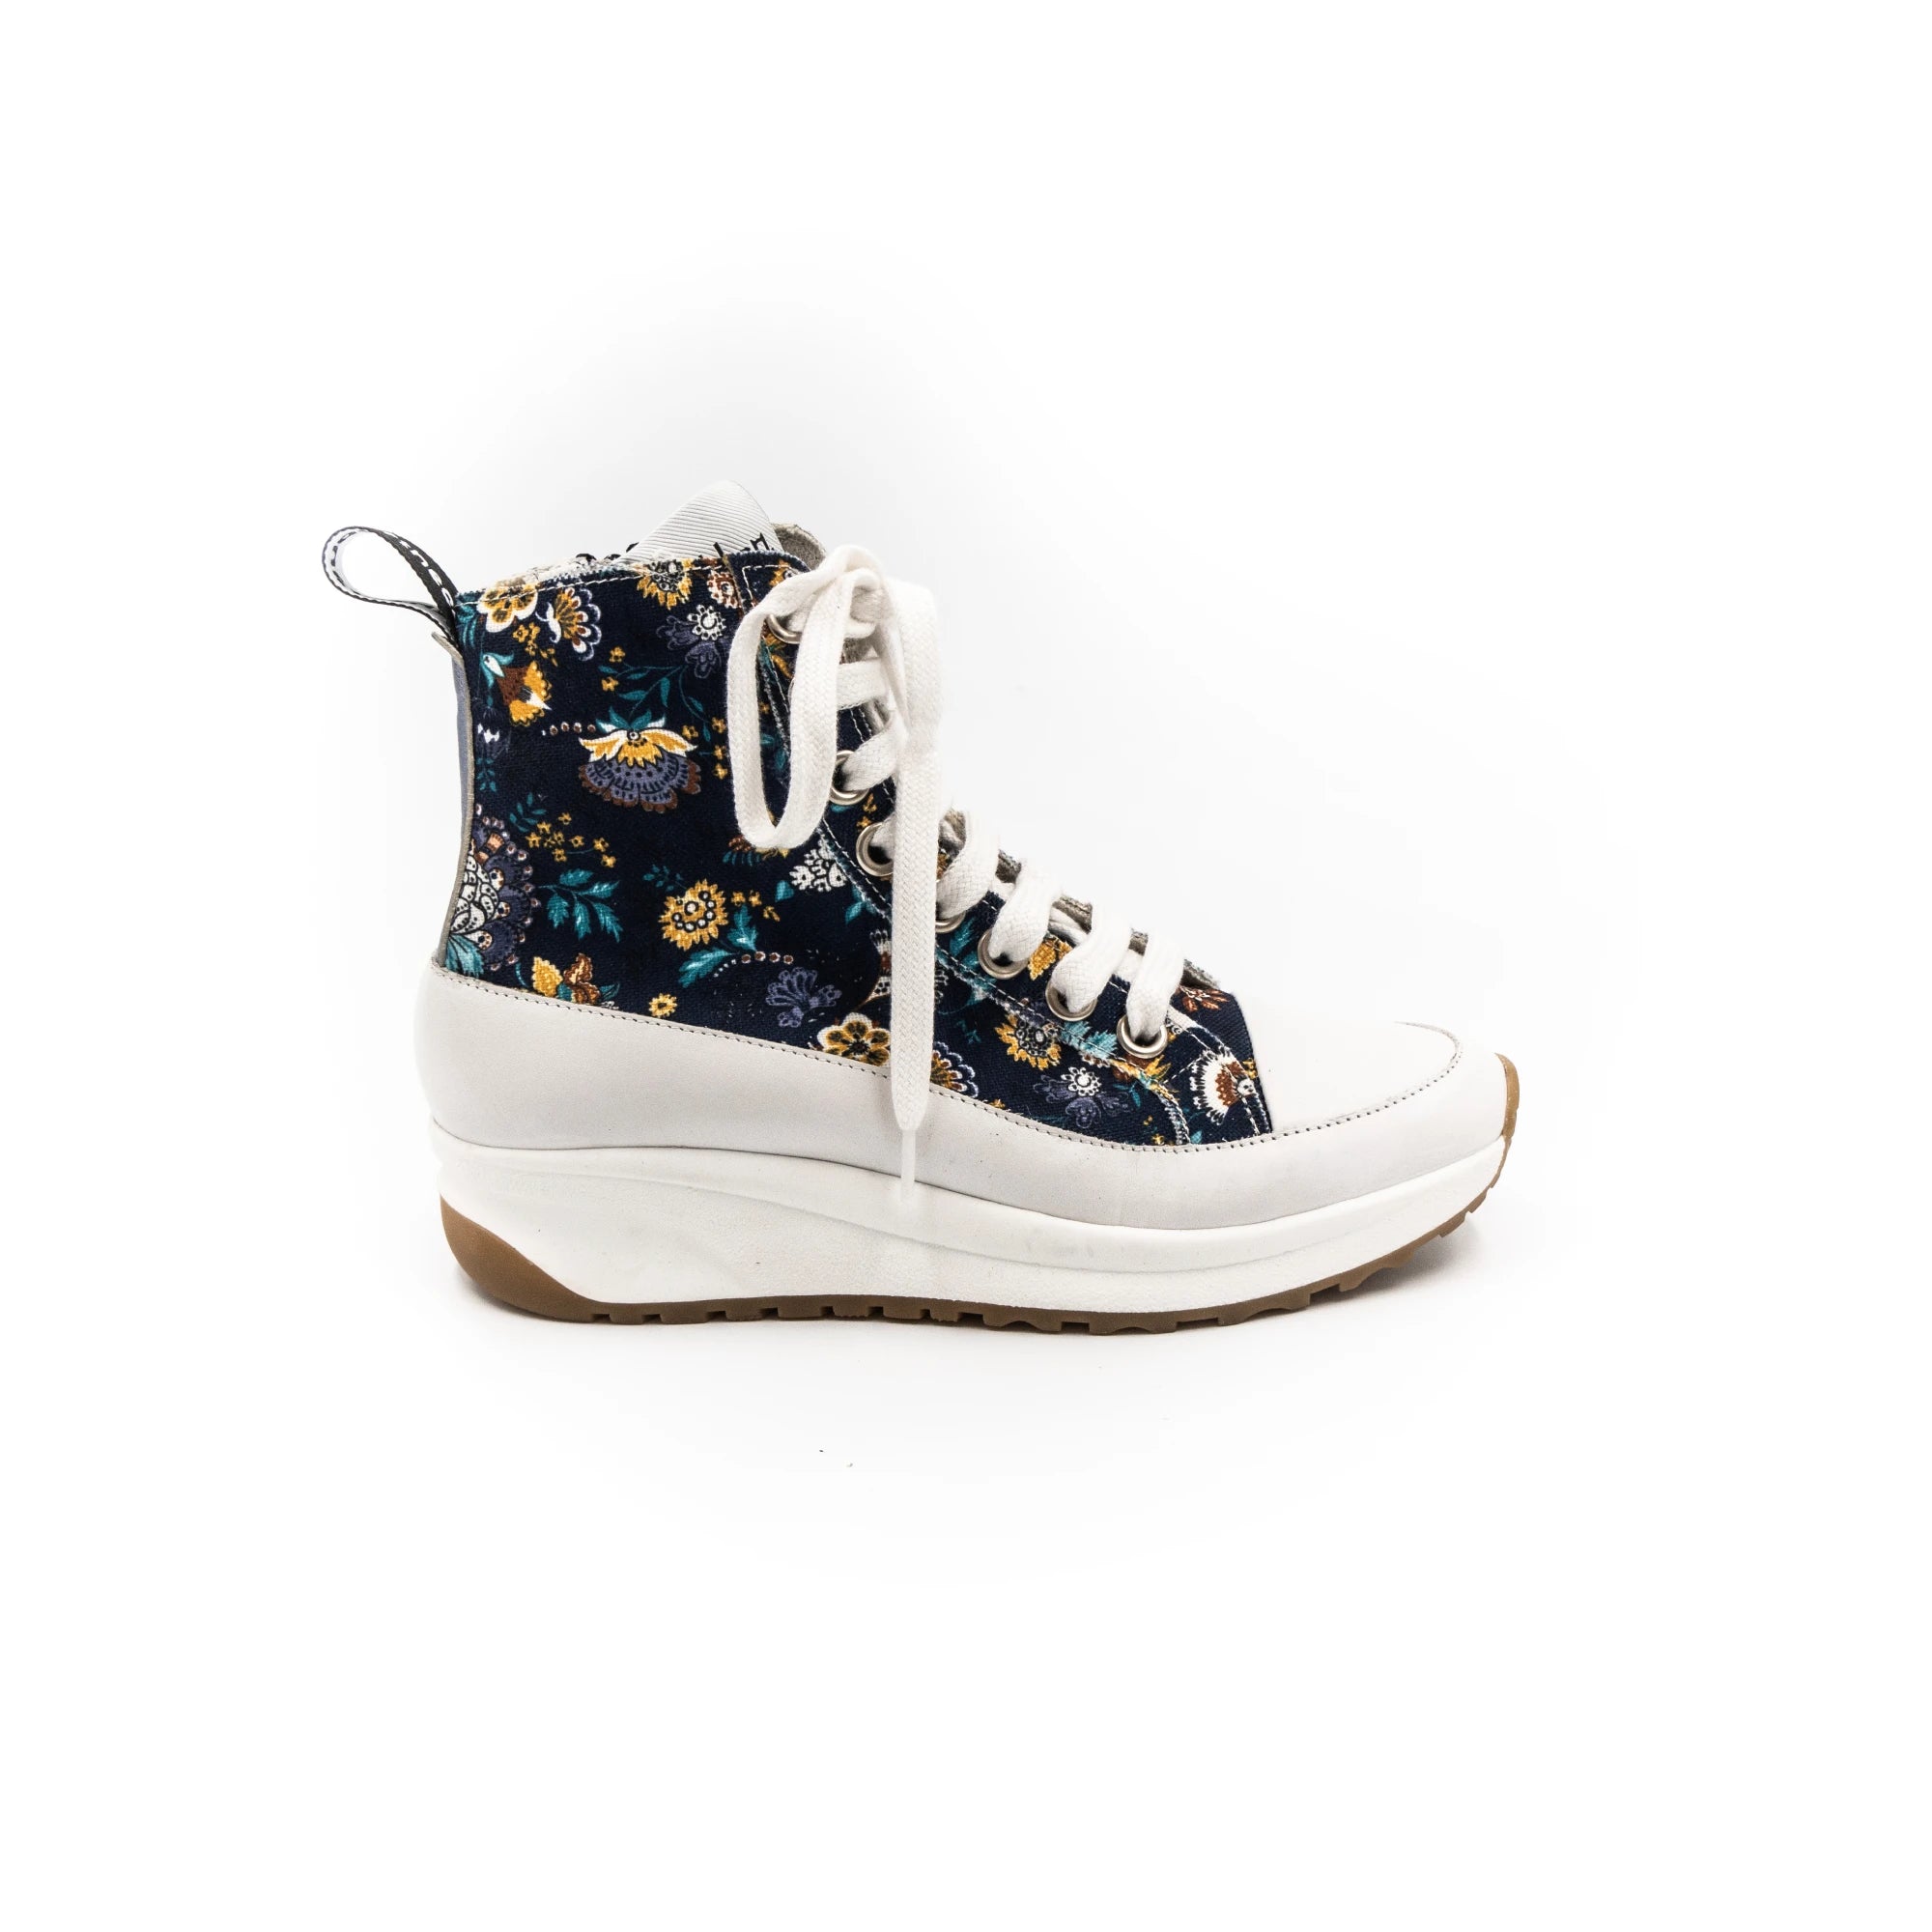 High-top sneakers with floral pattern.